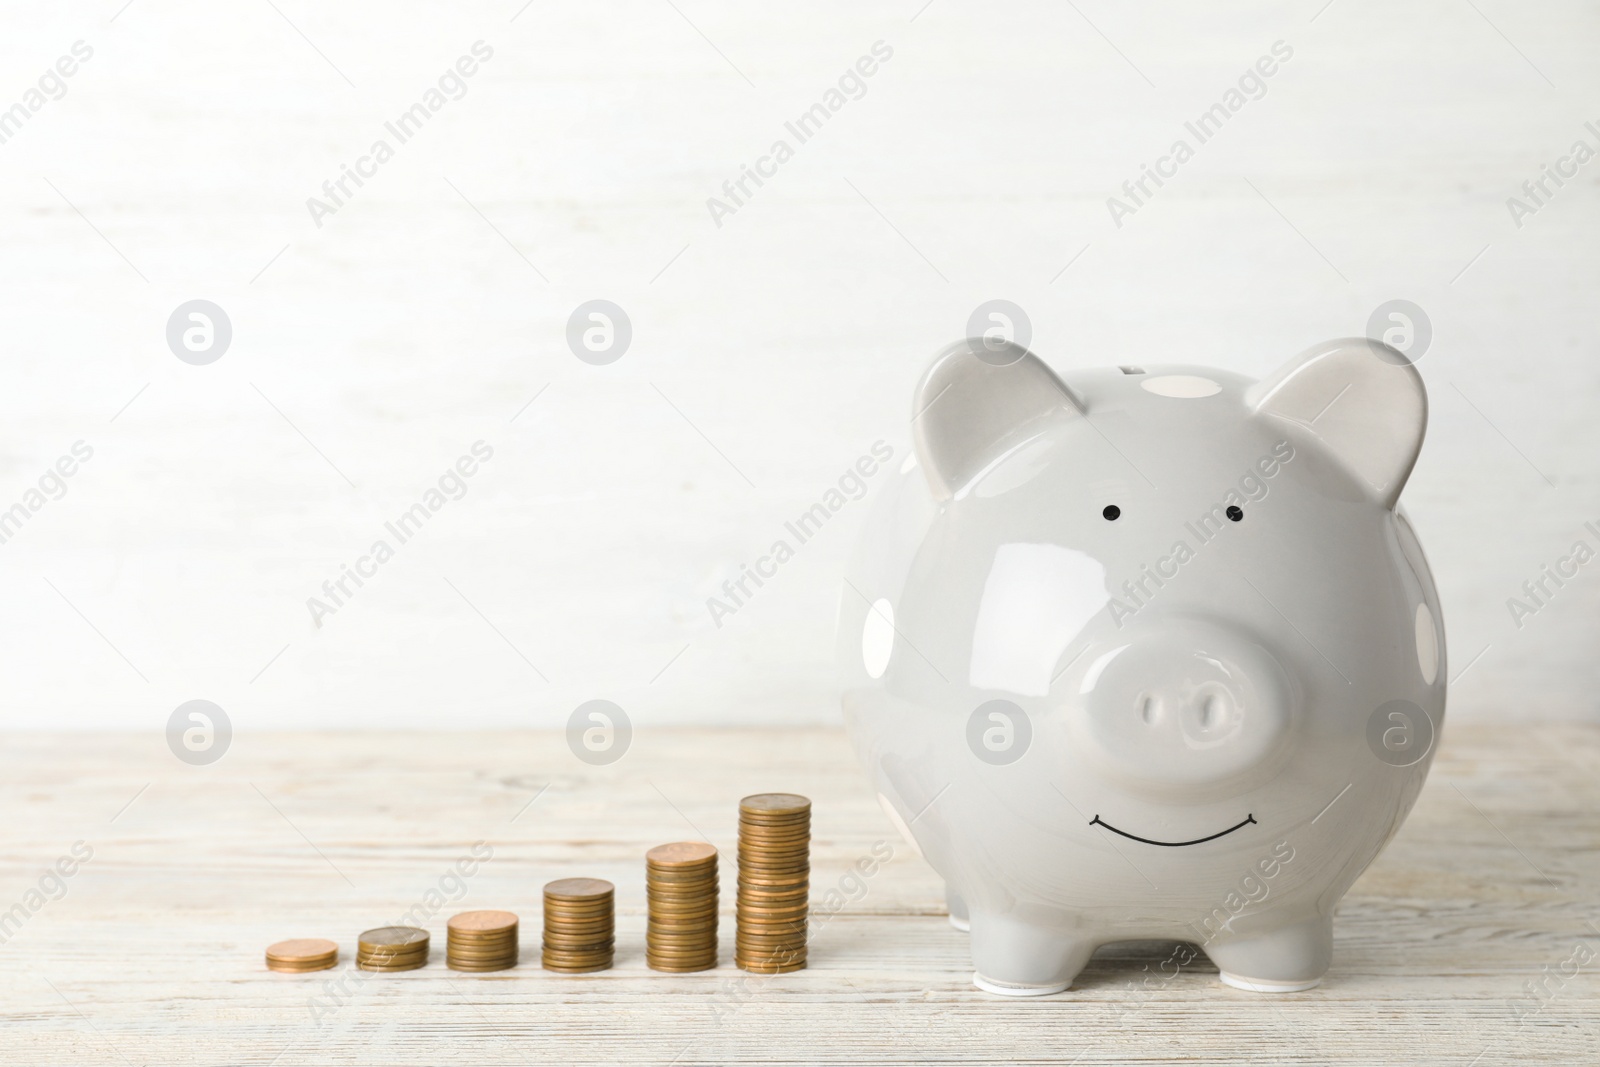 Photo of Ceramic piggy bank and many coins on table against light background. Space for text